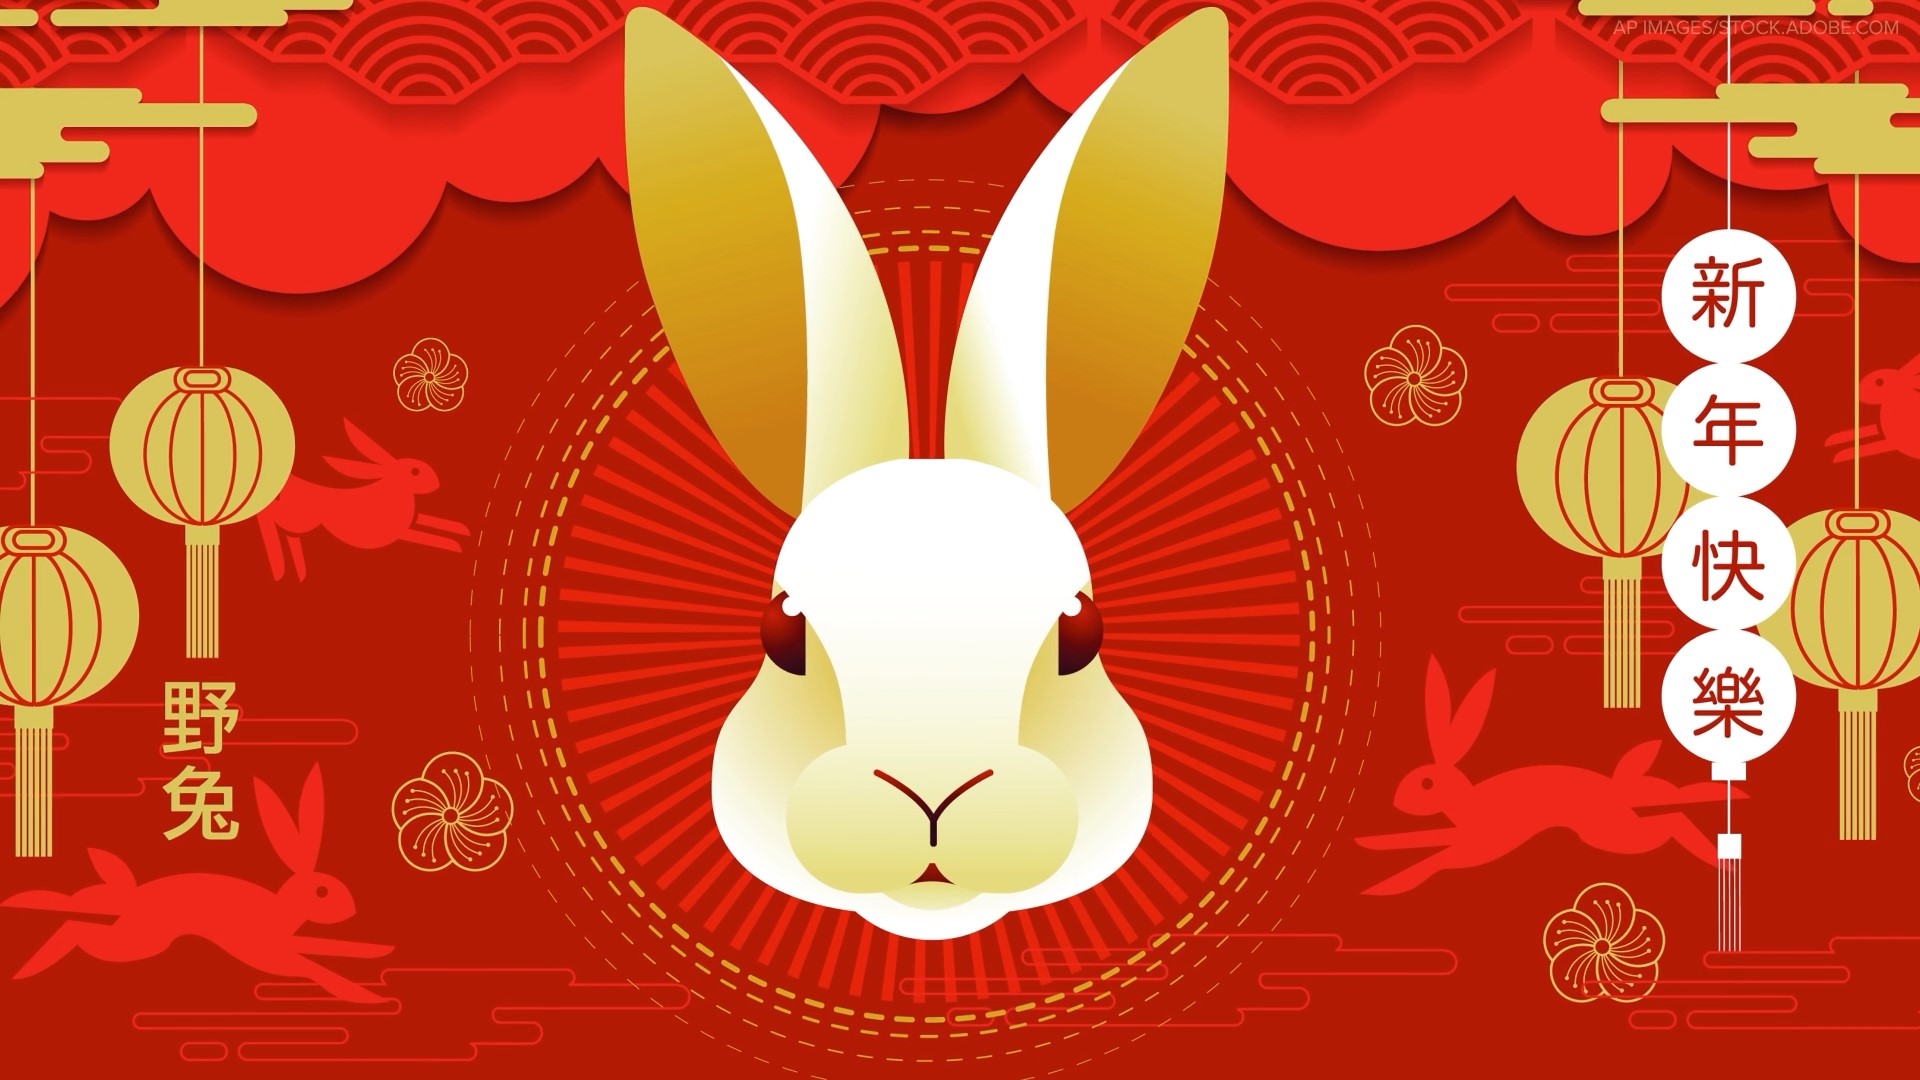 Lunar New Year is a major holiday especially for people in China, which is why it's often called Chinese New Year.